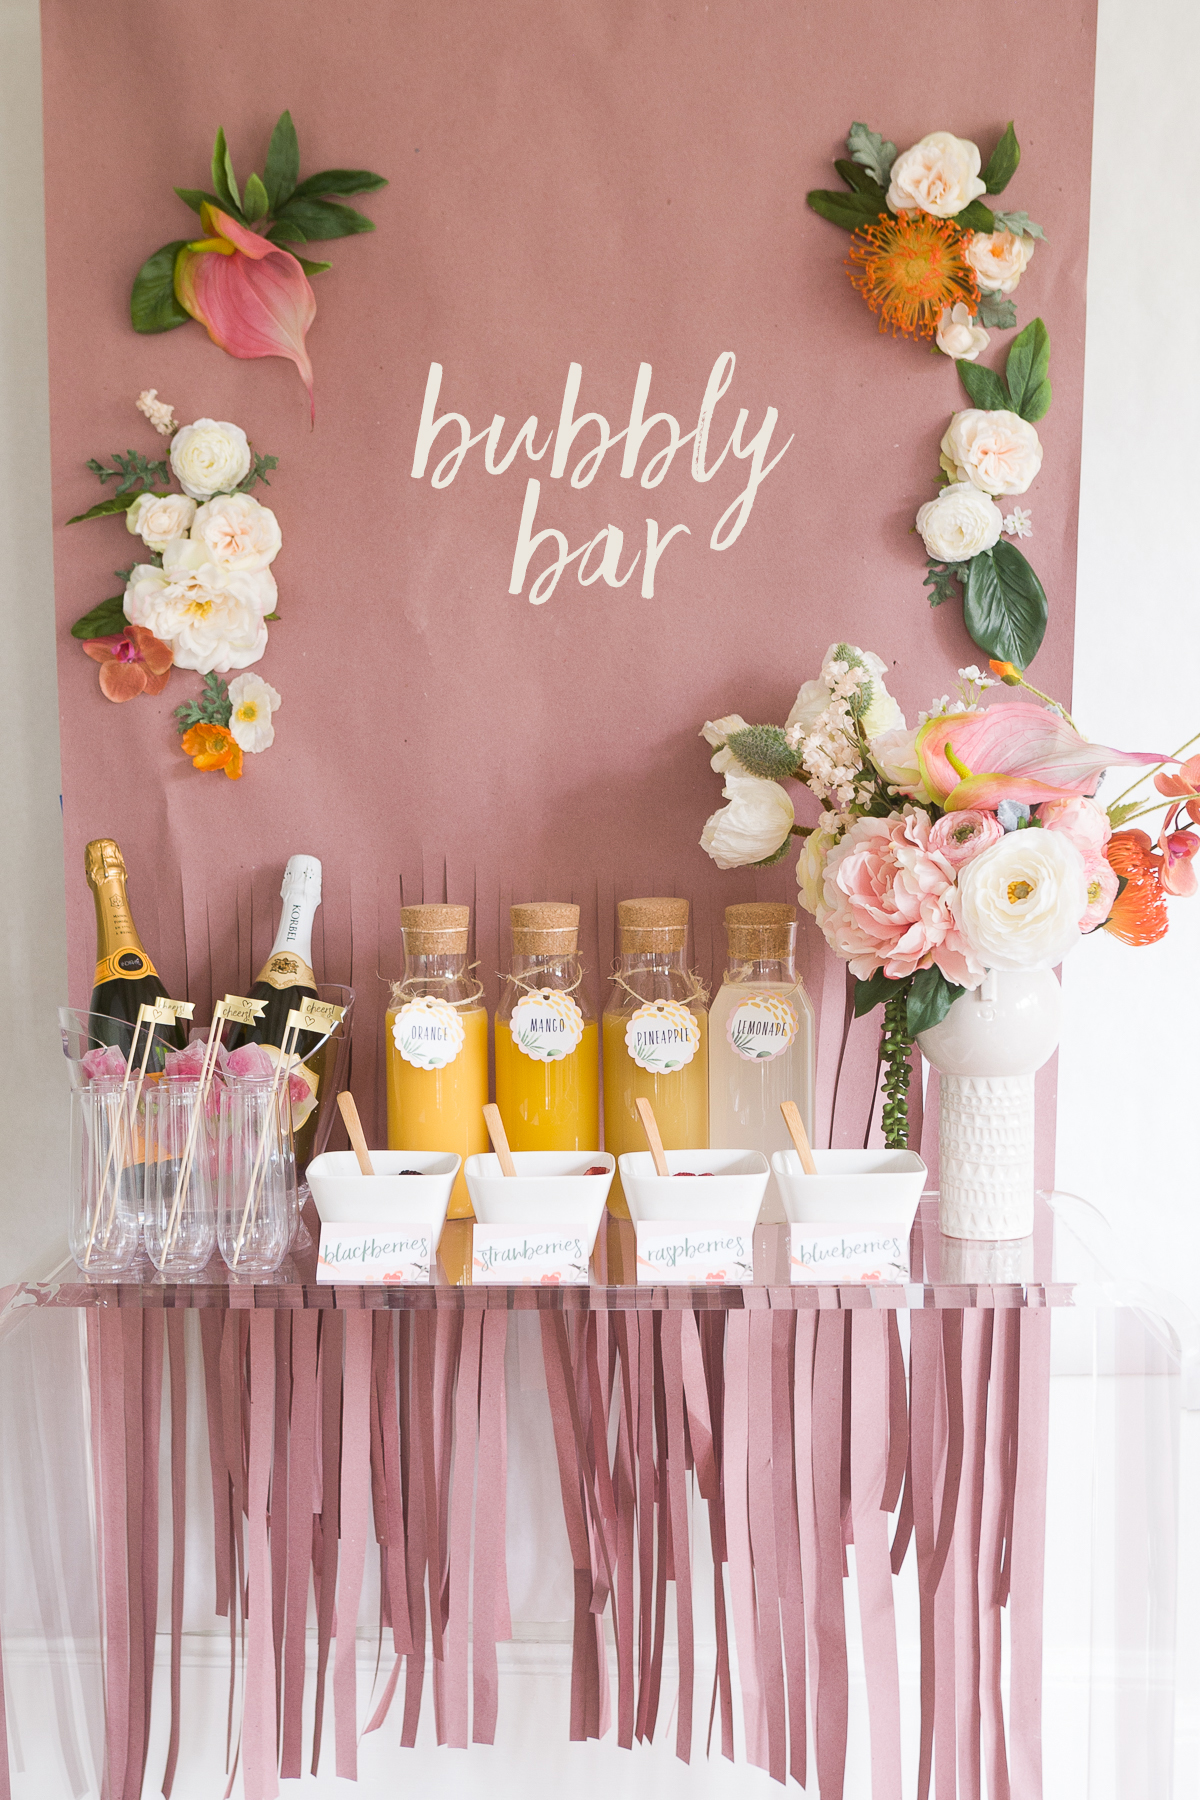 Juices and champagne on a table with a backdrop of flowers and bubbly bar sign as an idea for bridal shower decorations